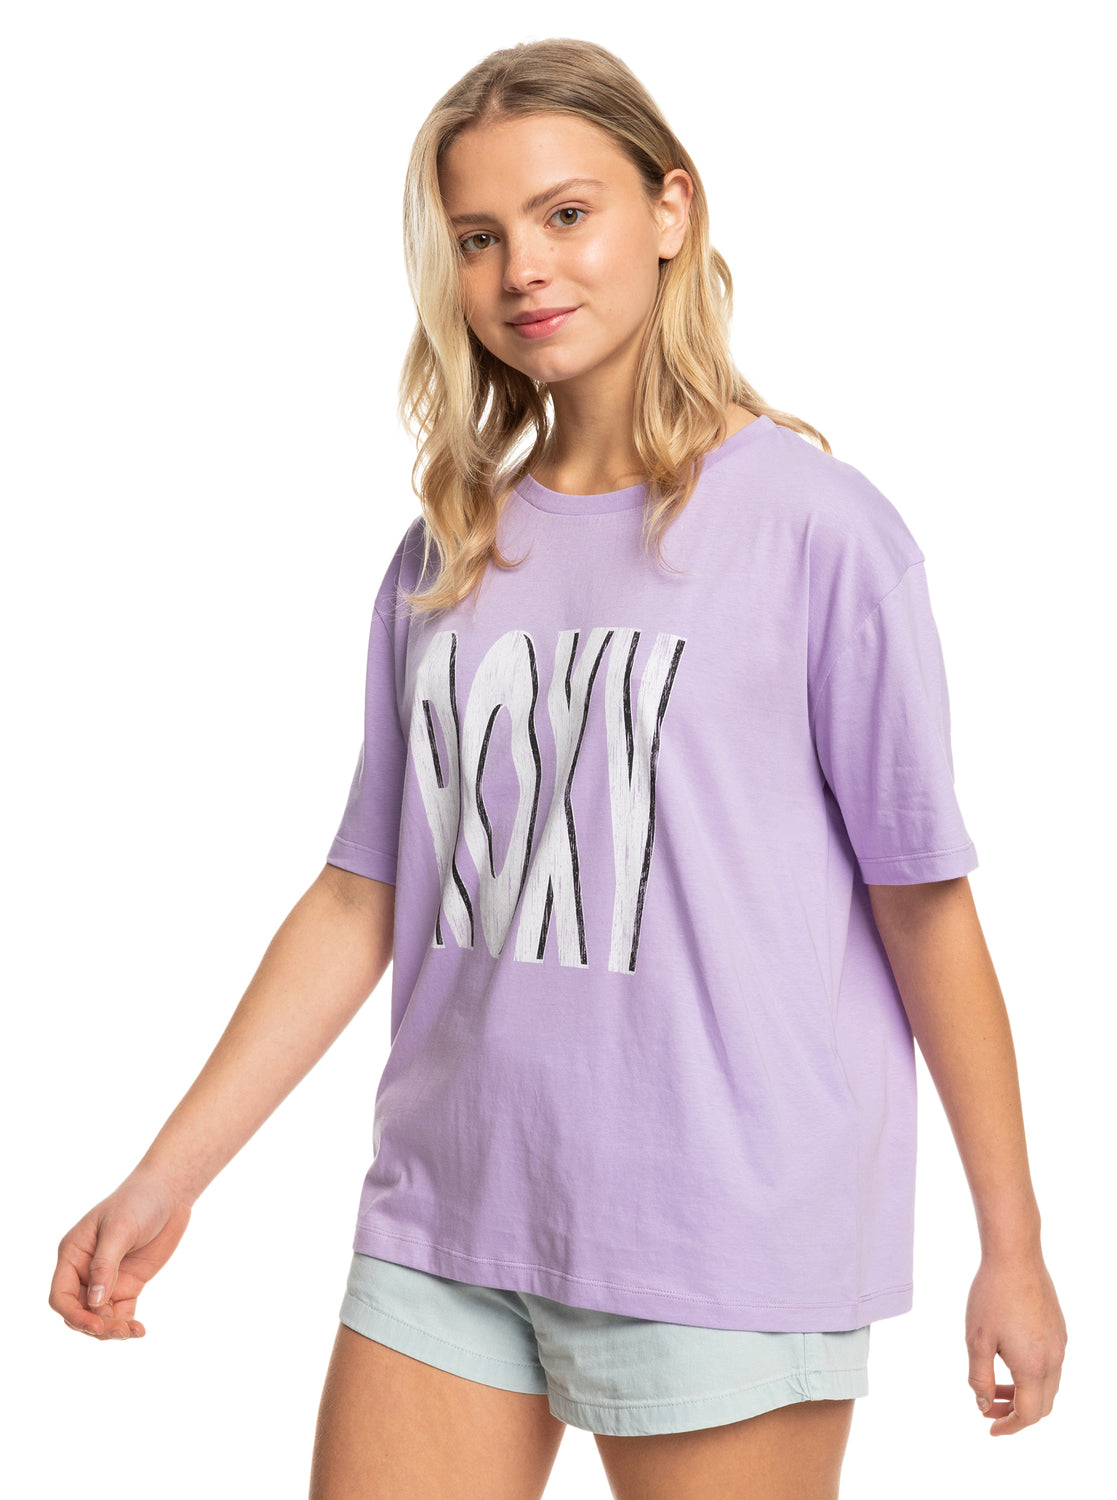 Roxy Sand Under the Sky T-shirt in Purple Rose